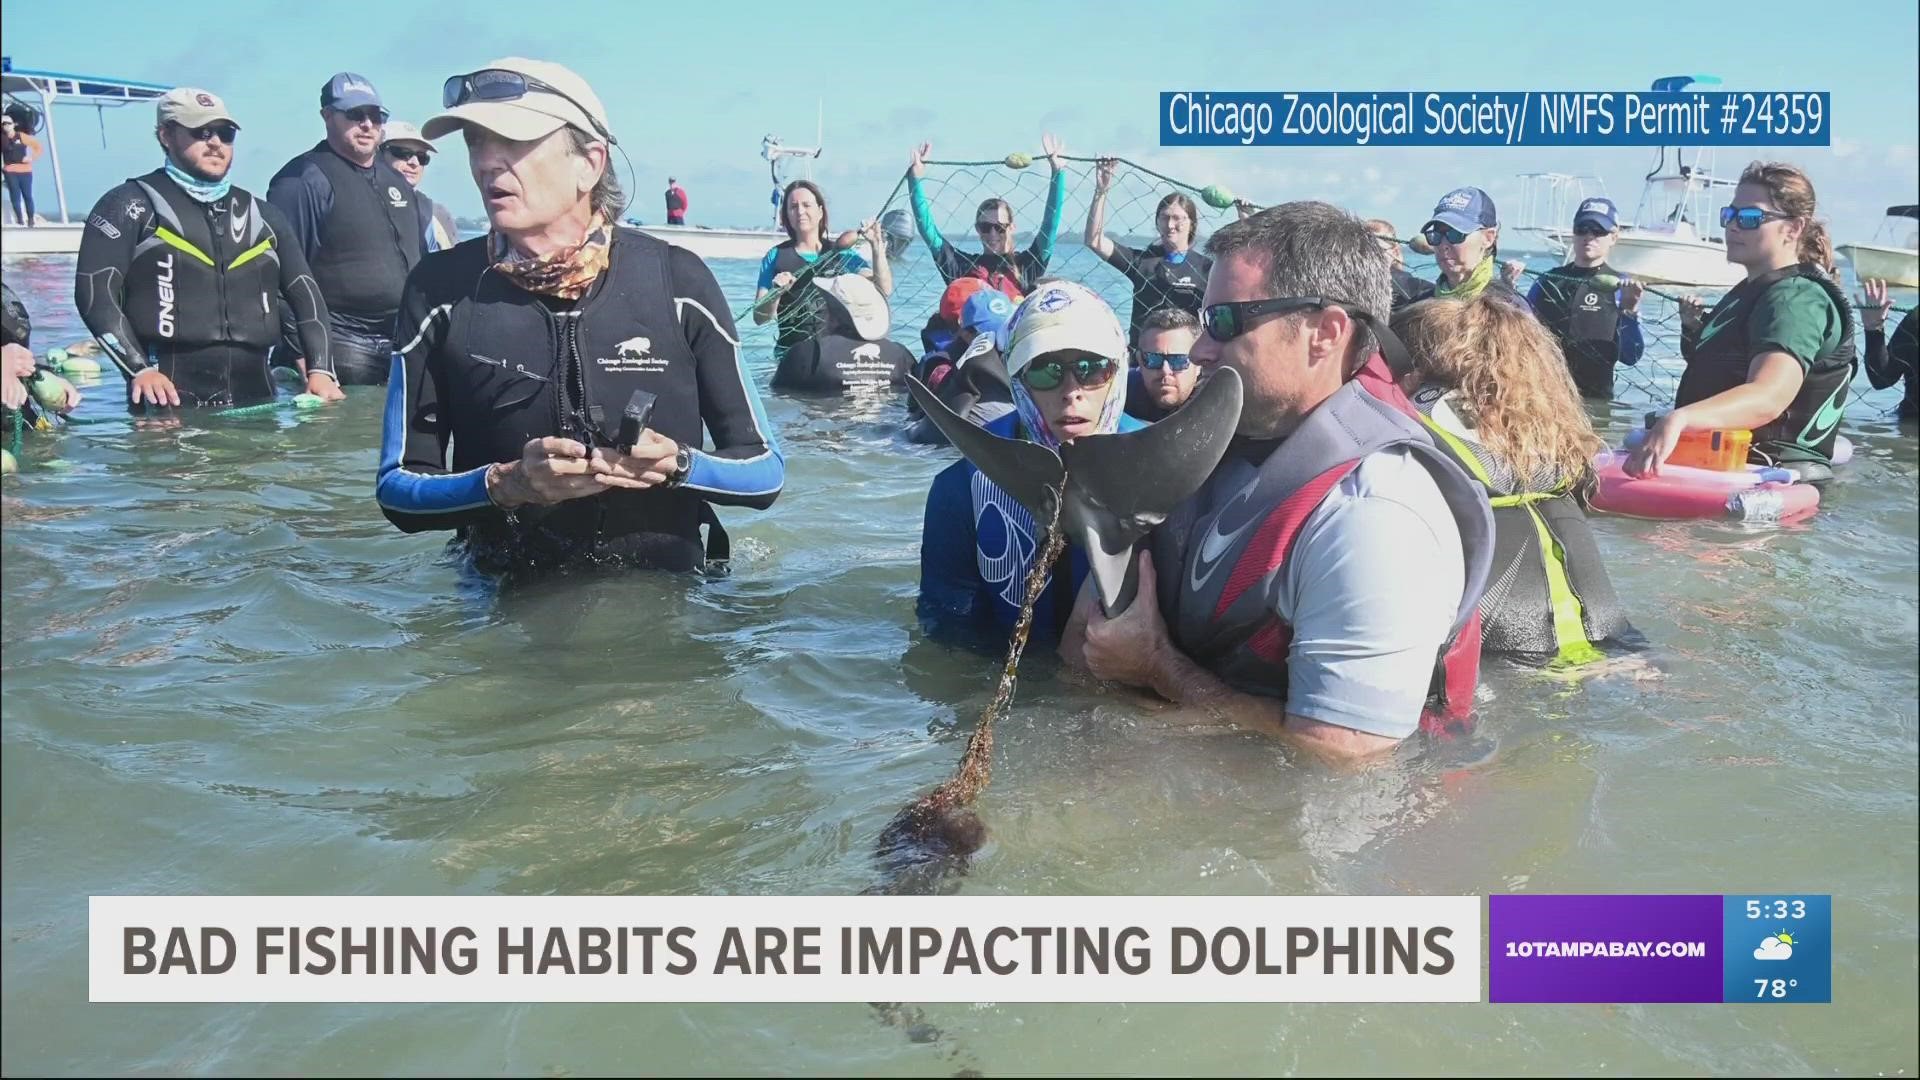 Rescuers and researchers say this is just one example of how improper fishing habits impact our local dolphin population.